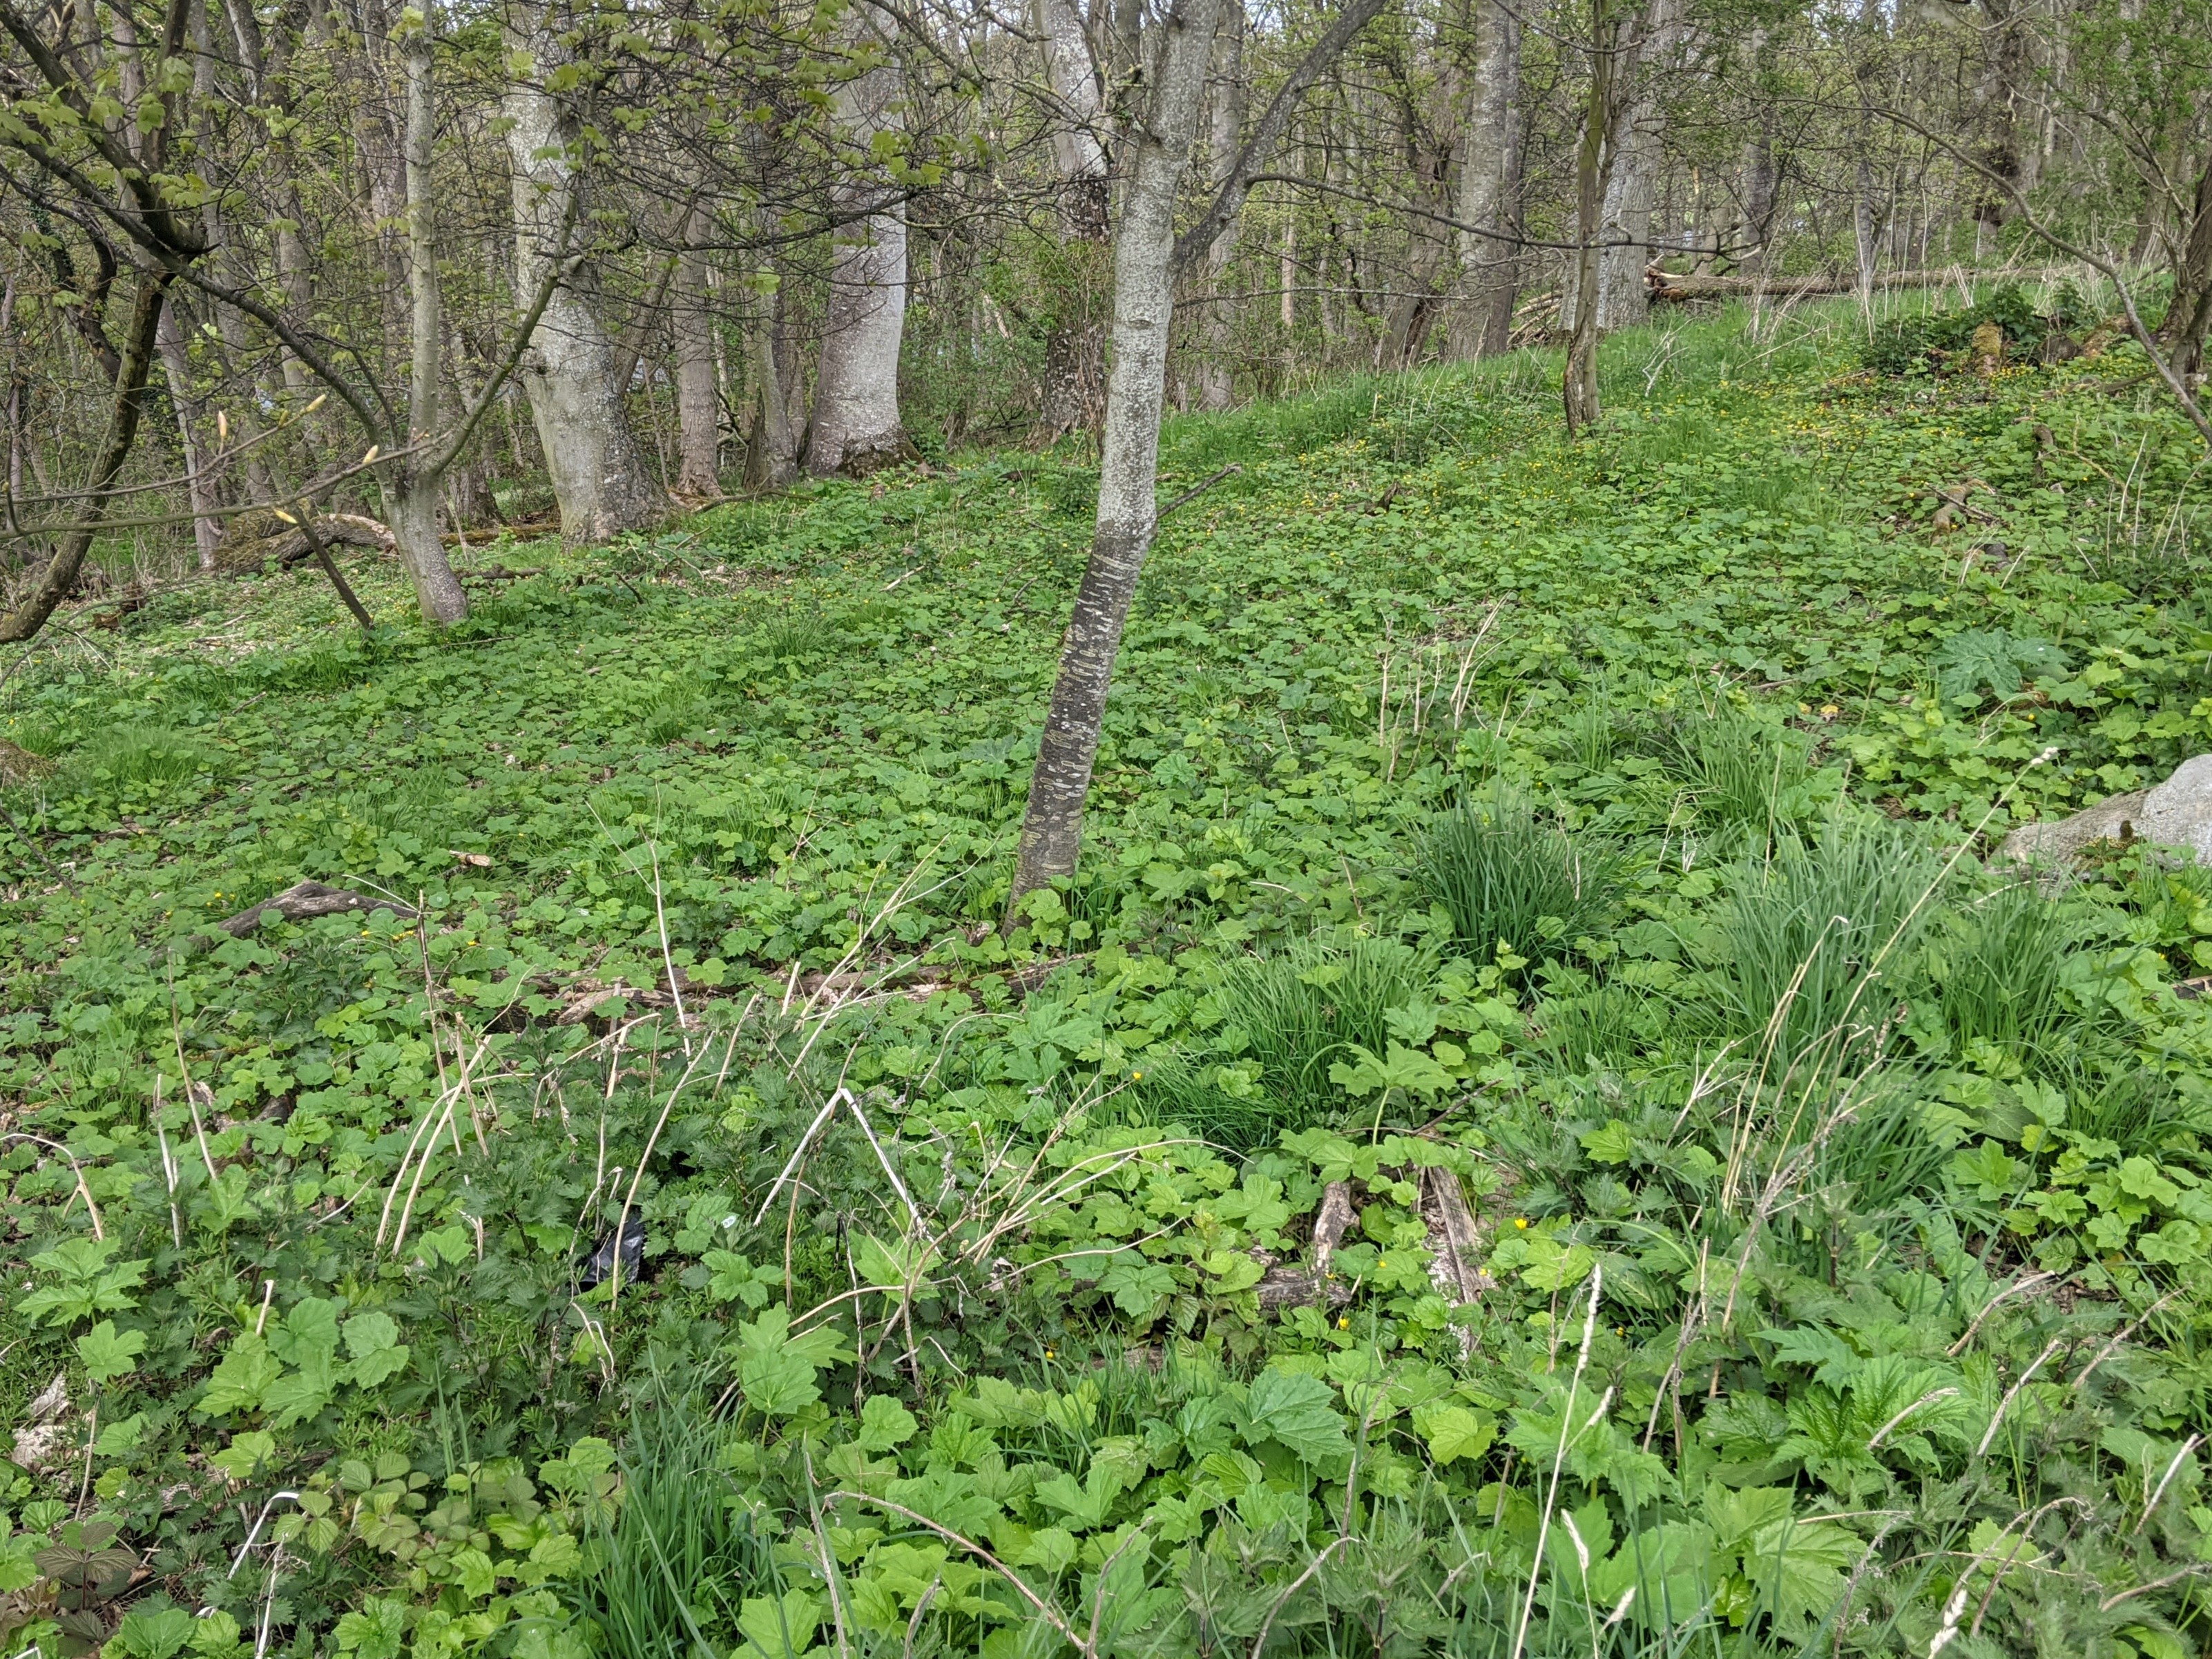 Woodland floor with expansive covering of giant hogweed seedlings